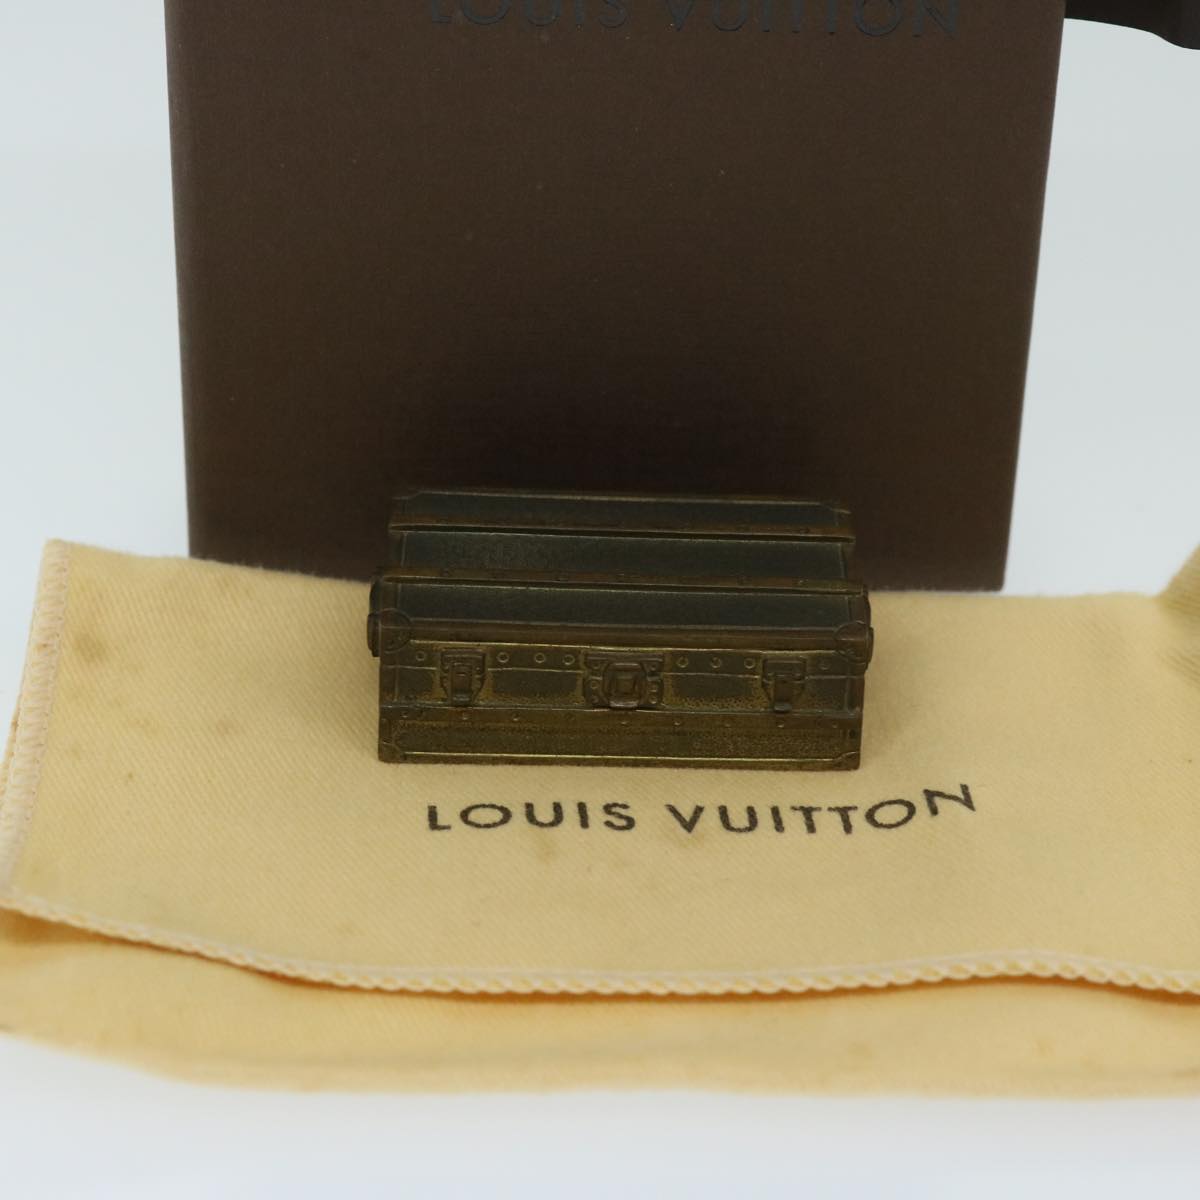 LOUIS VUITTON Paper Weight Metal Gold LV Auth 67858